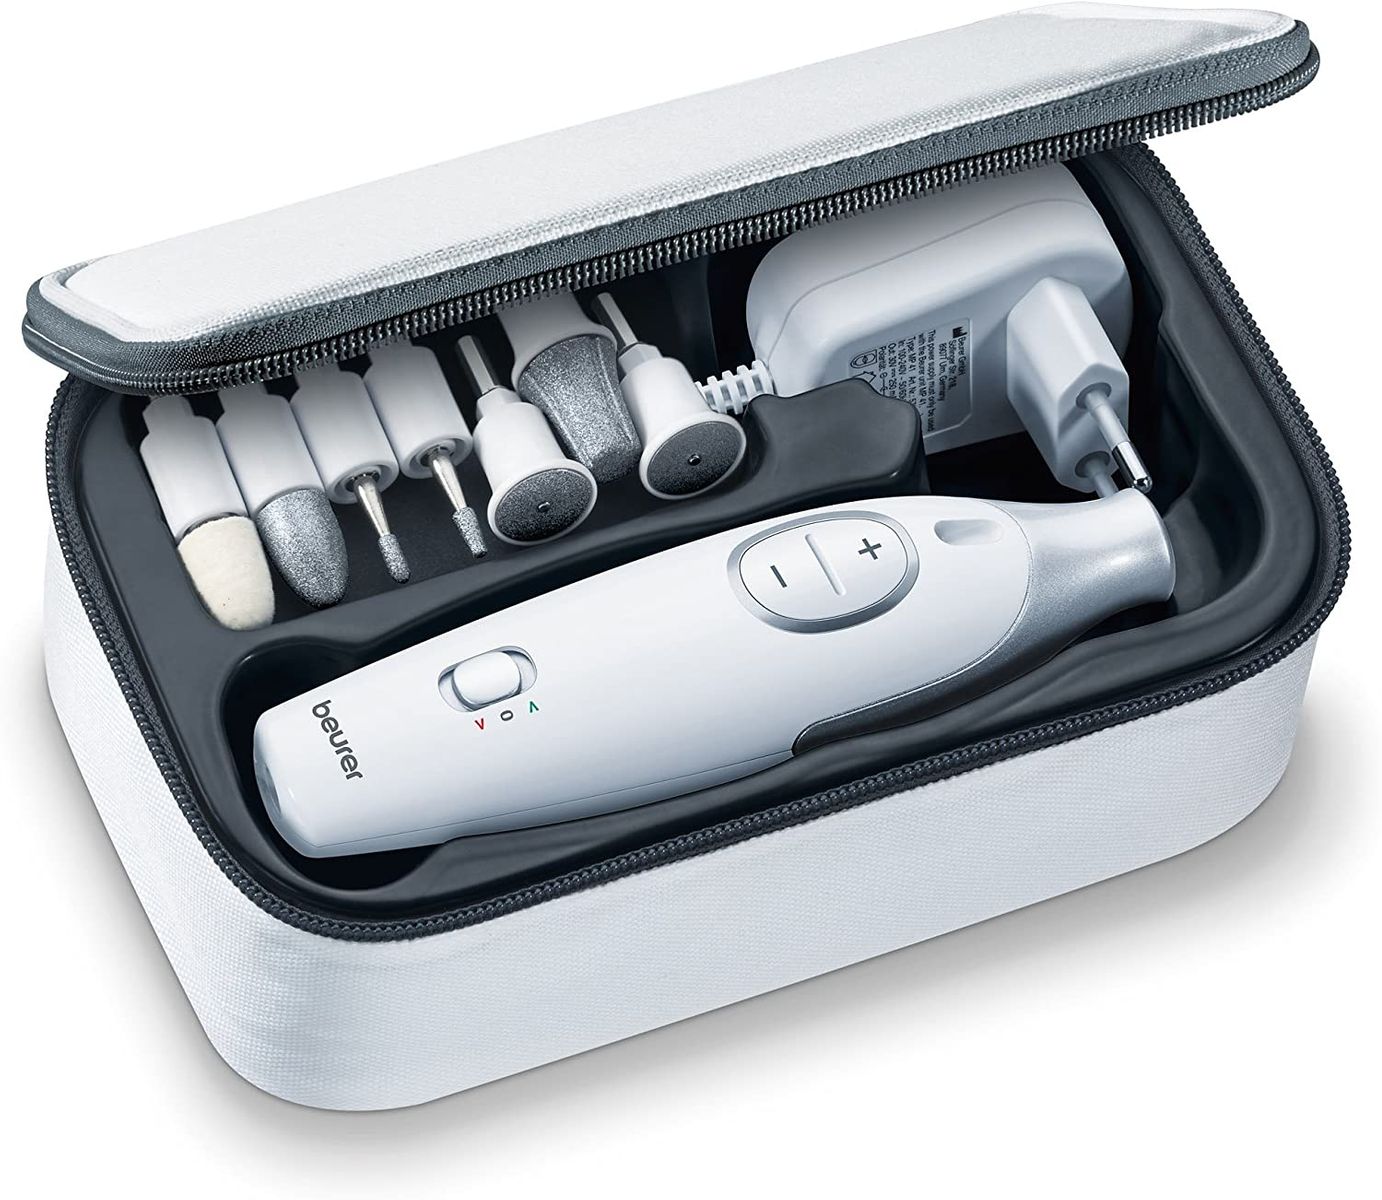 Beurer MP 42 manicure/pedicure set, for well-groomed hands and feet, 7 high-quality attachments without manual nail set